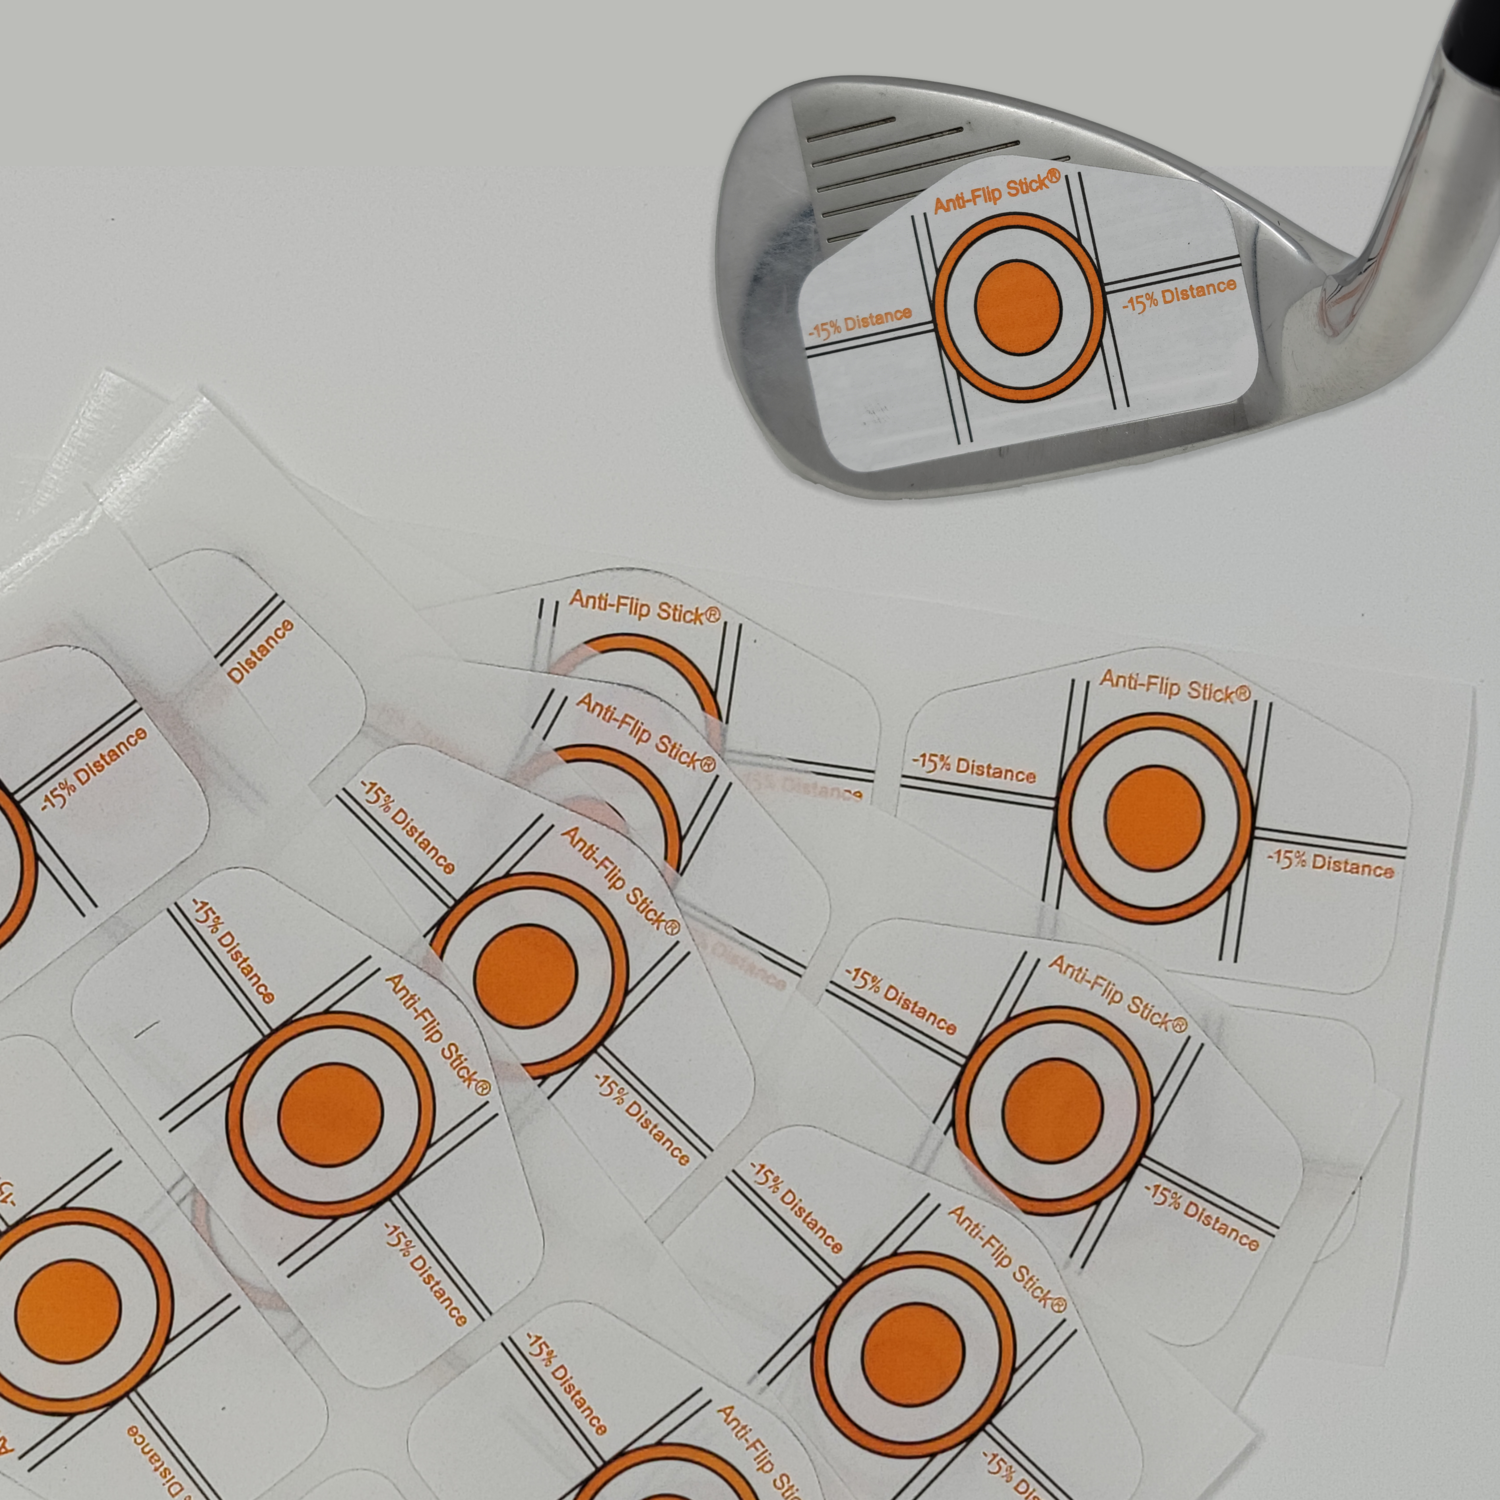 200 Golf Impact Tape Decals. Golf Club Impact Tape Stickers For Driver, Irons Or Woods.